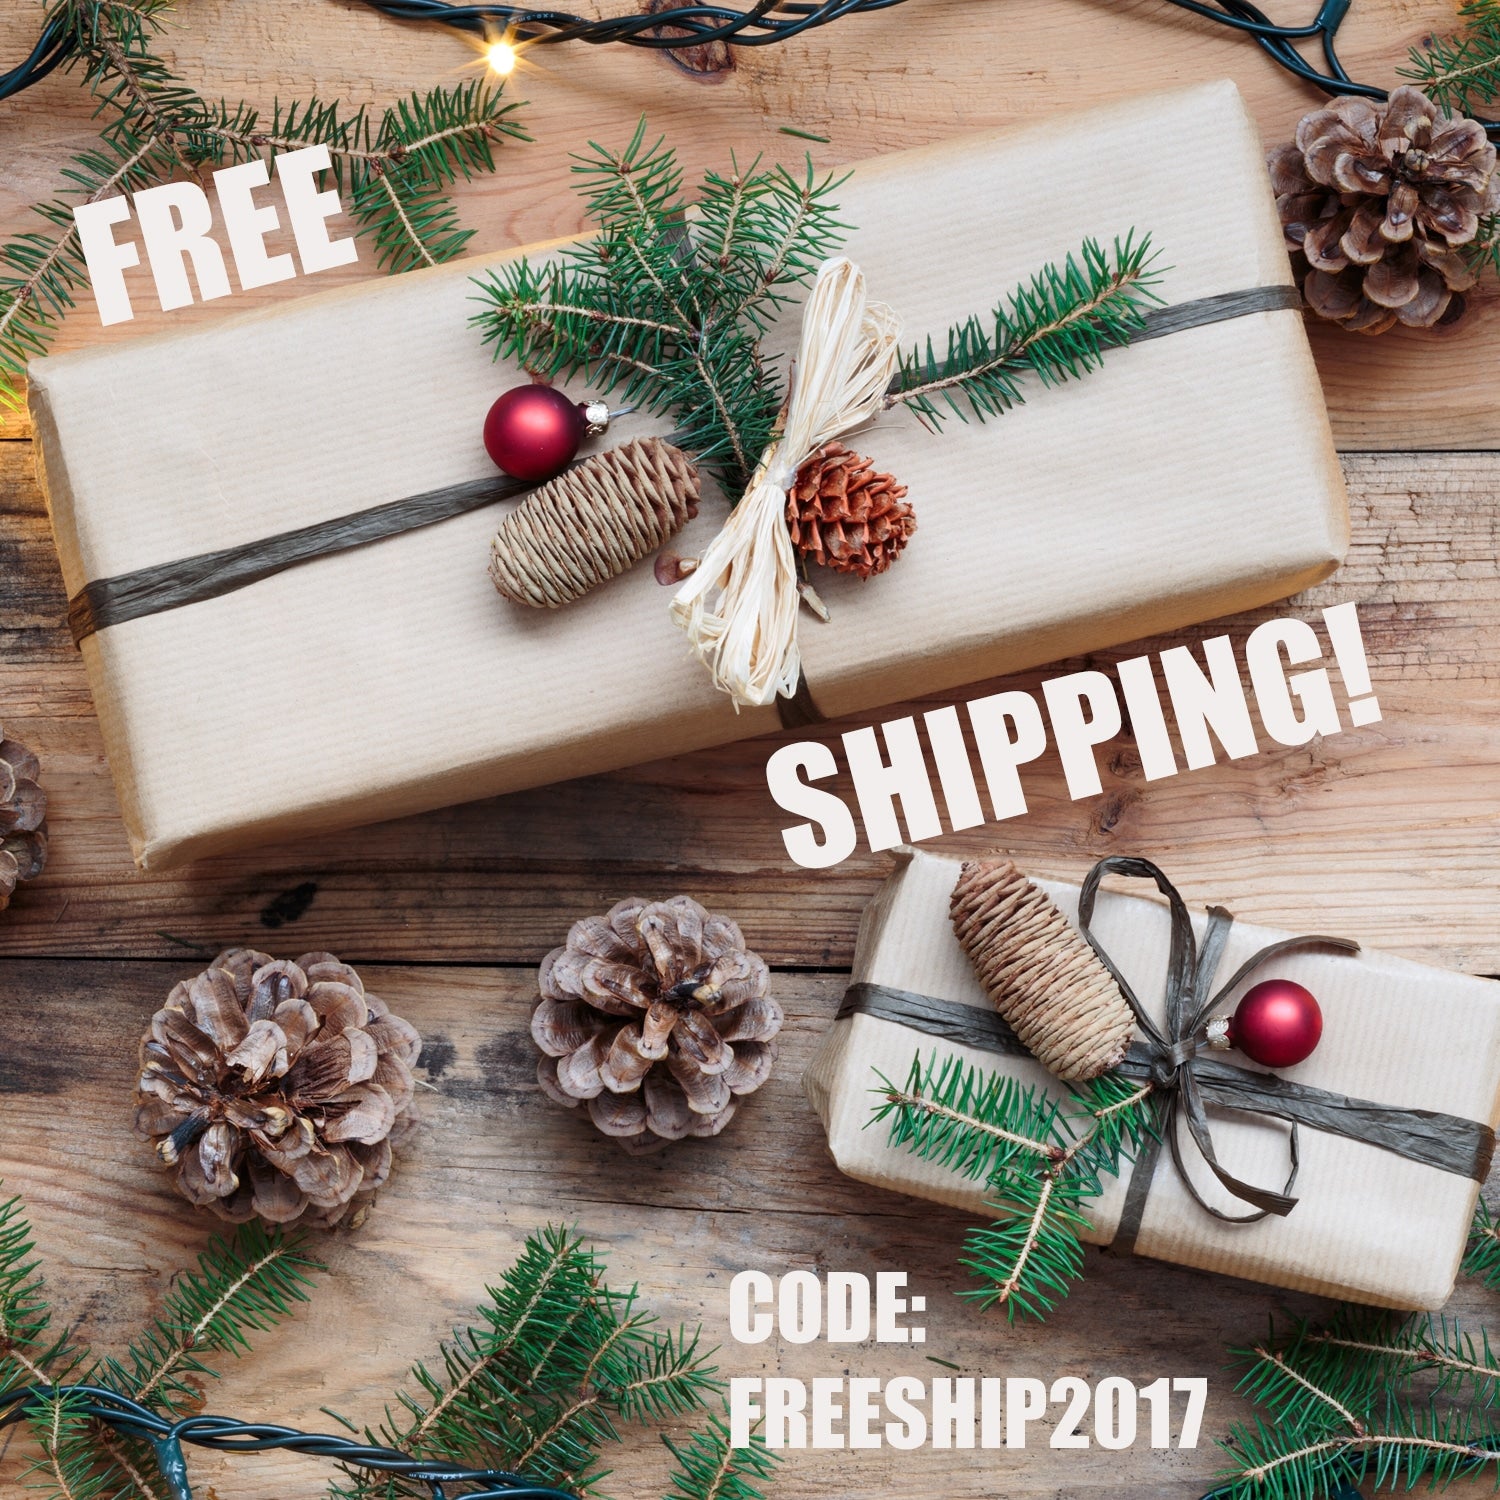 Wrapped Christmas presents on wooden floor free shipping coupon code Rebel Green